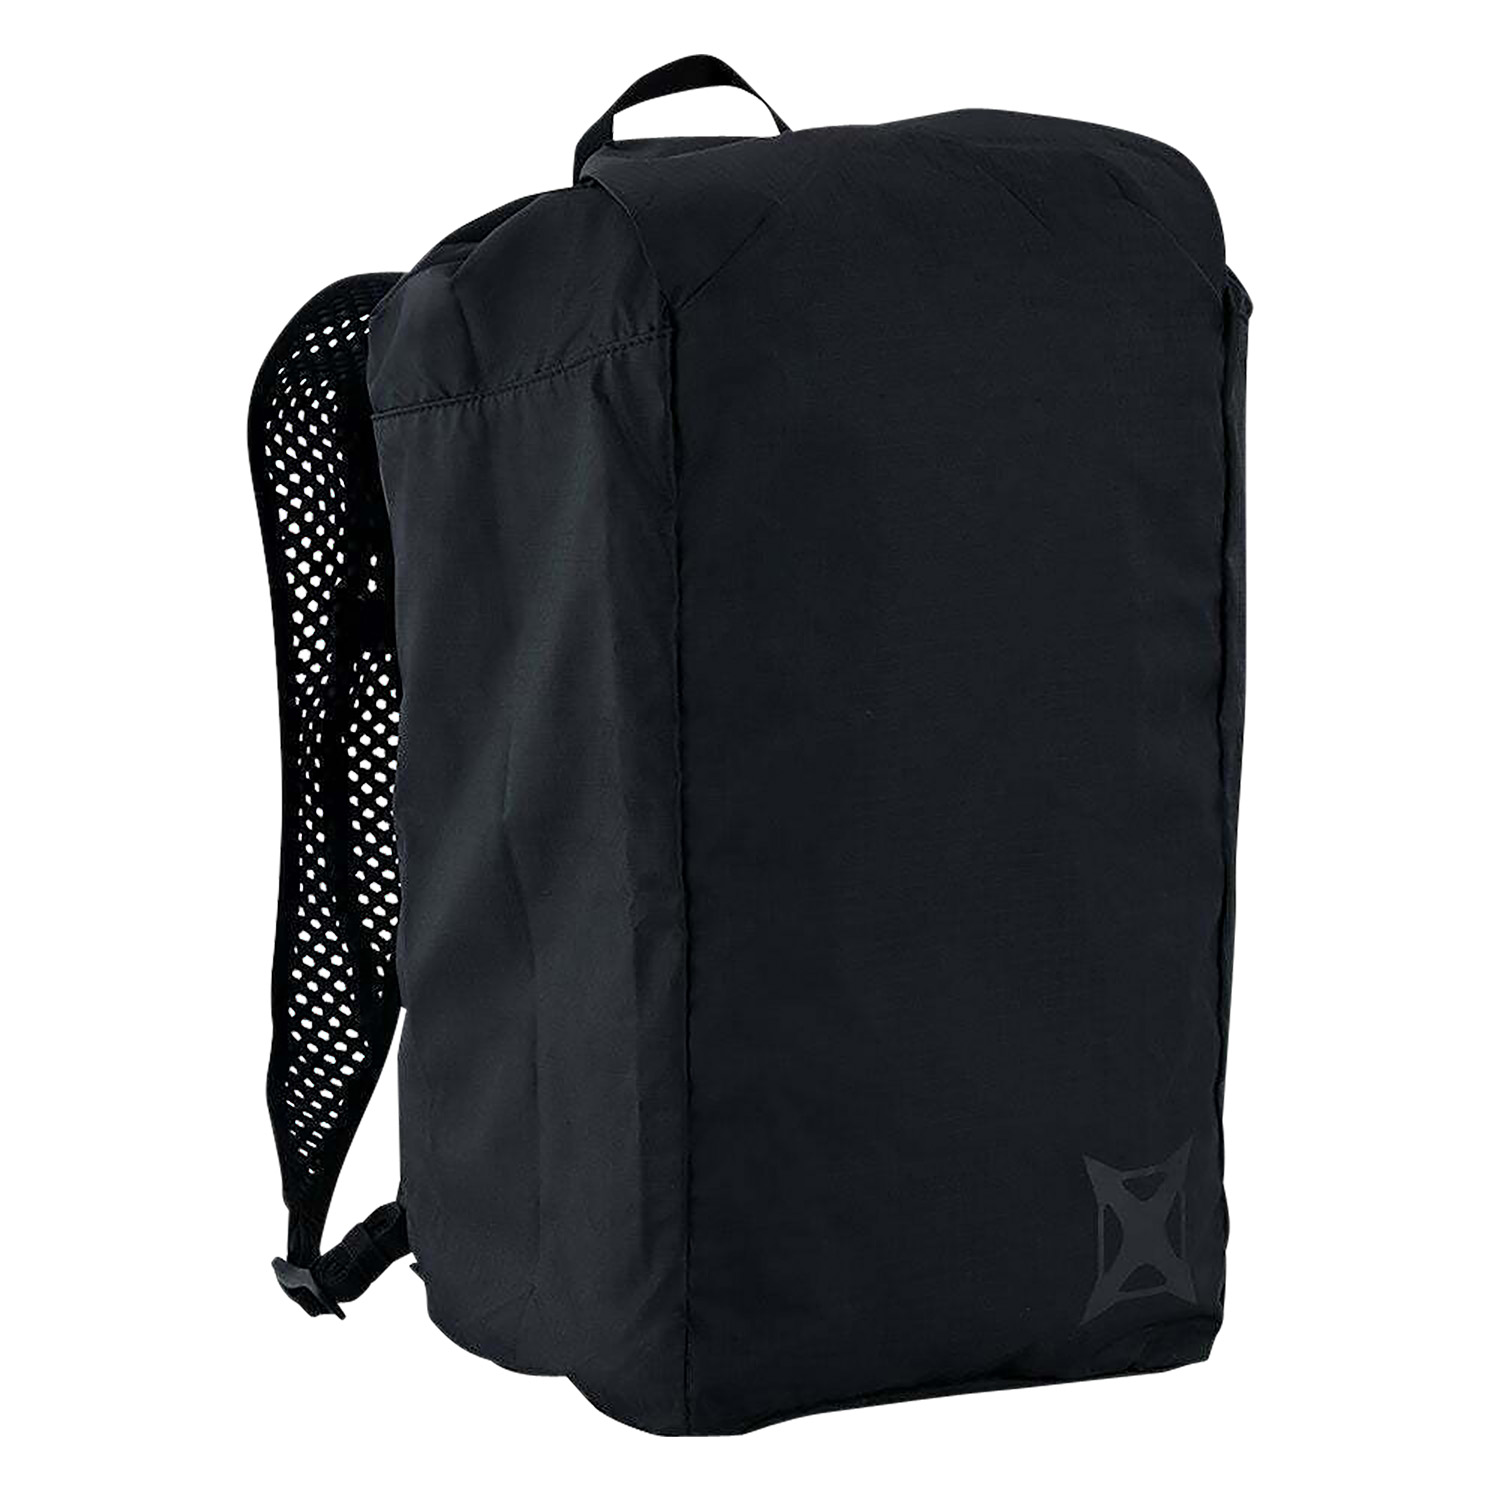 Vertx VTX5001 Go Pack Backpack Black Nylon Drawstring Top With Cover Flap Compatible SOCP Panel